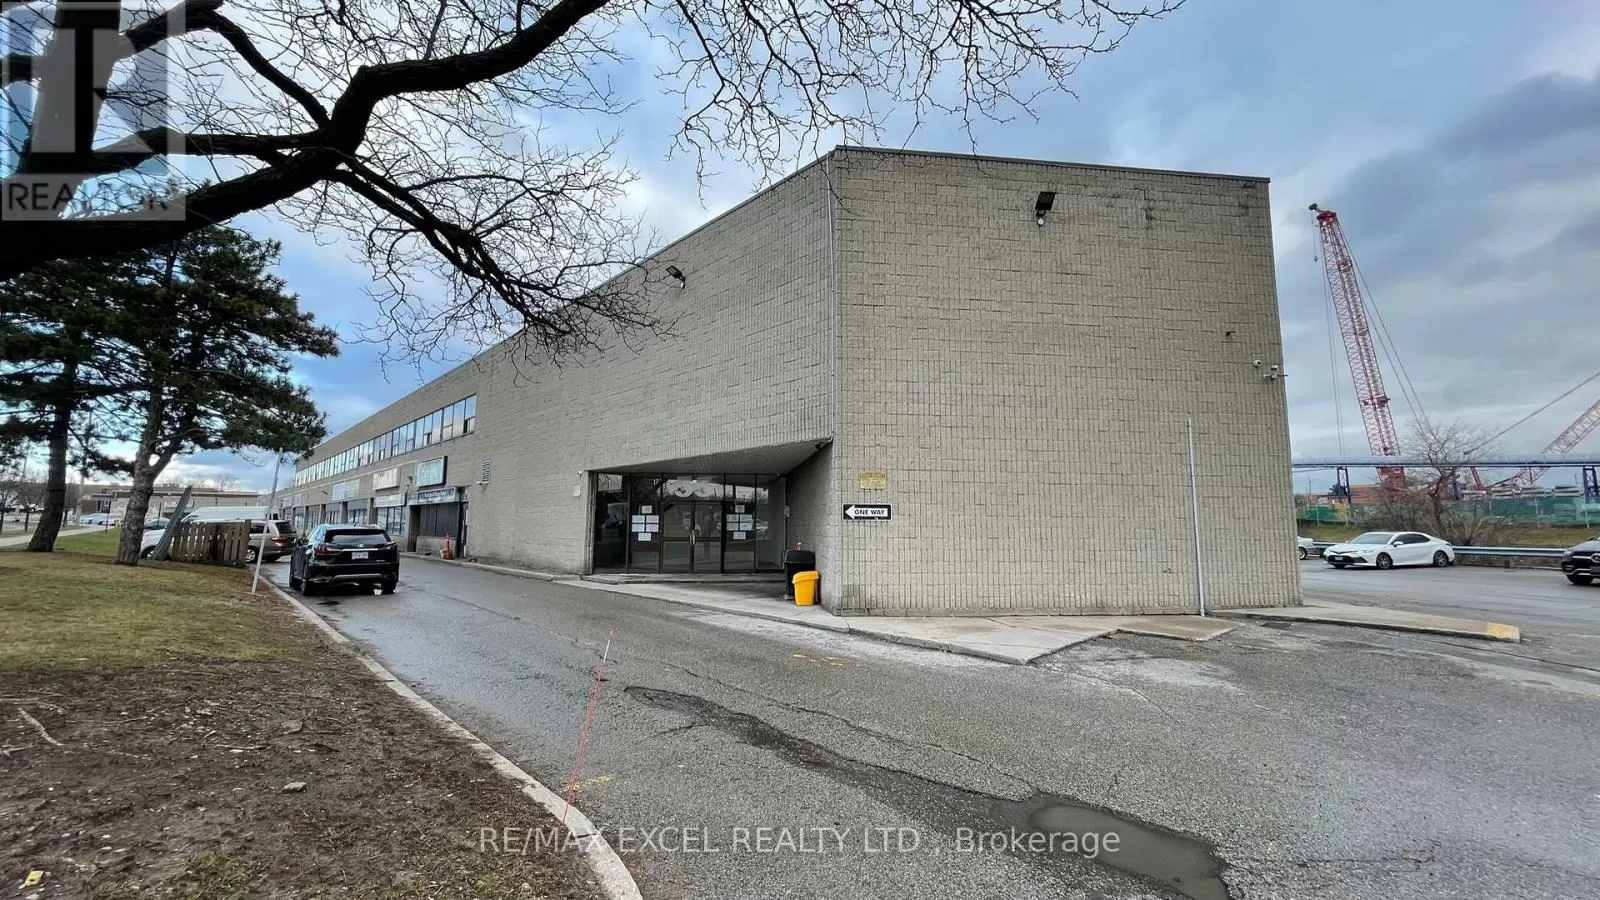 Offices for rent: 230v - 55 Nugget Avenue, Toronto, Ontario M1S 3L1